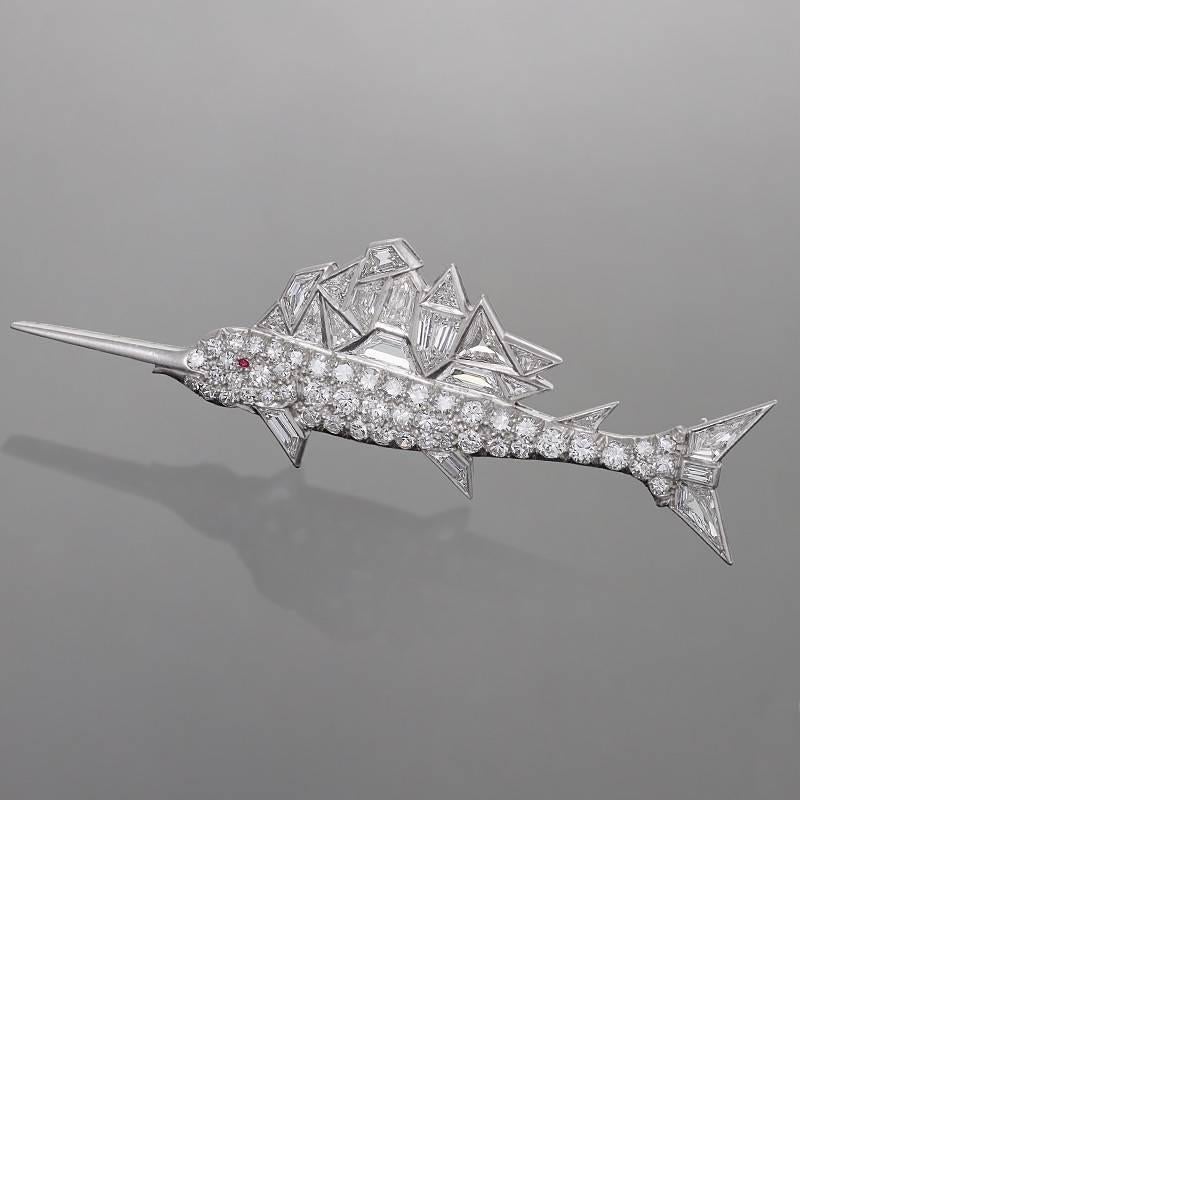 A Mid-20th Century platinum brooch with diamonds in the shape of a sailfish. The brooch has 21 mixed fancy-cut diamonds with an approximate total weight of 3.00 carats, and 48 round-cut diamonds with an approximate total weight of 1.50 carats. Total